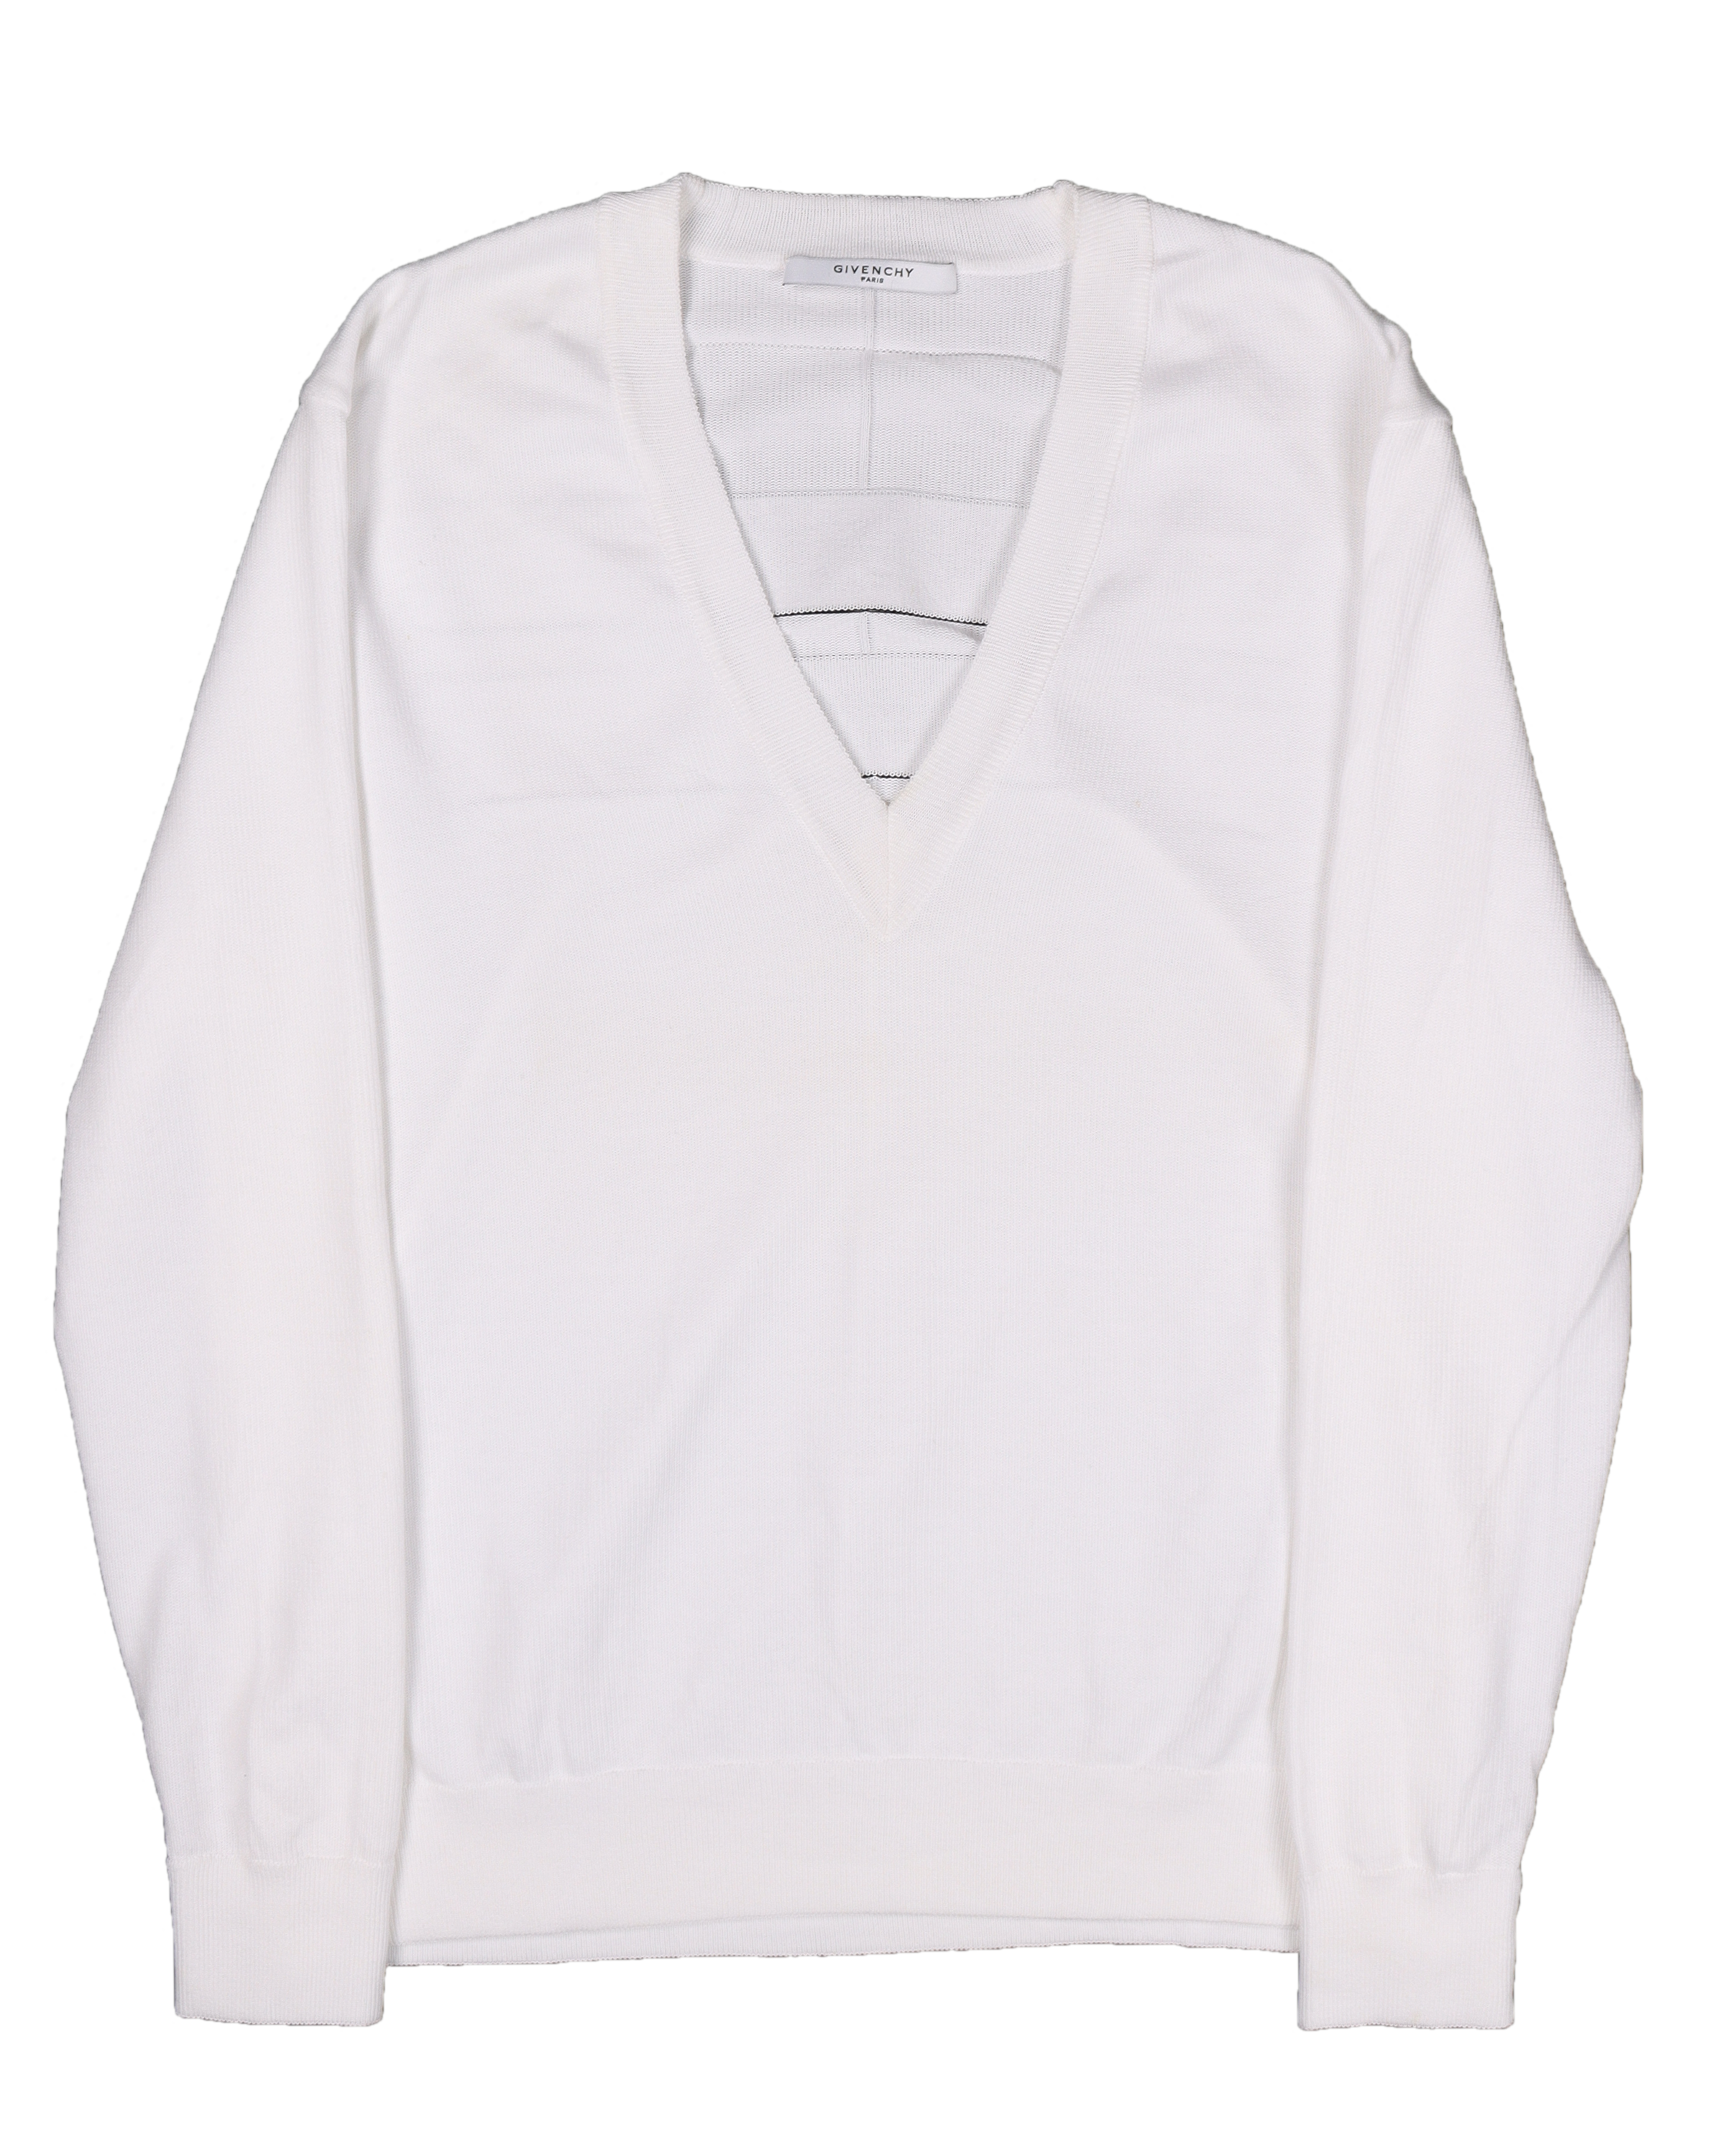 SS15 White Sweater